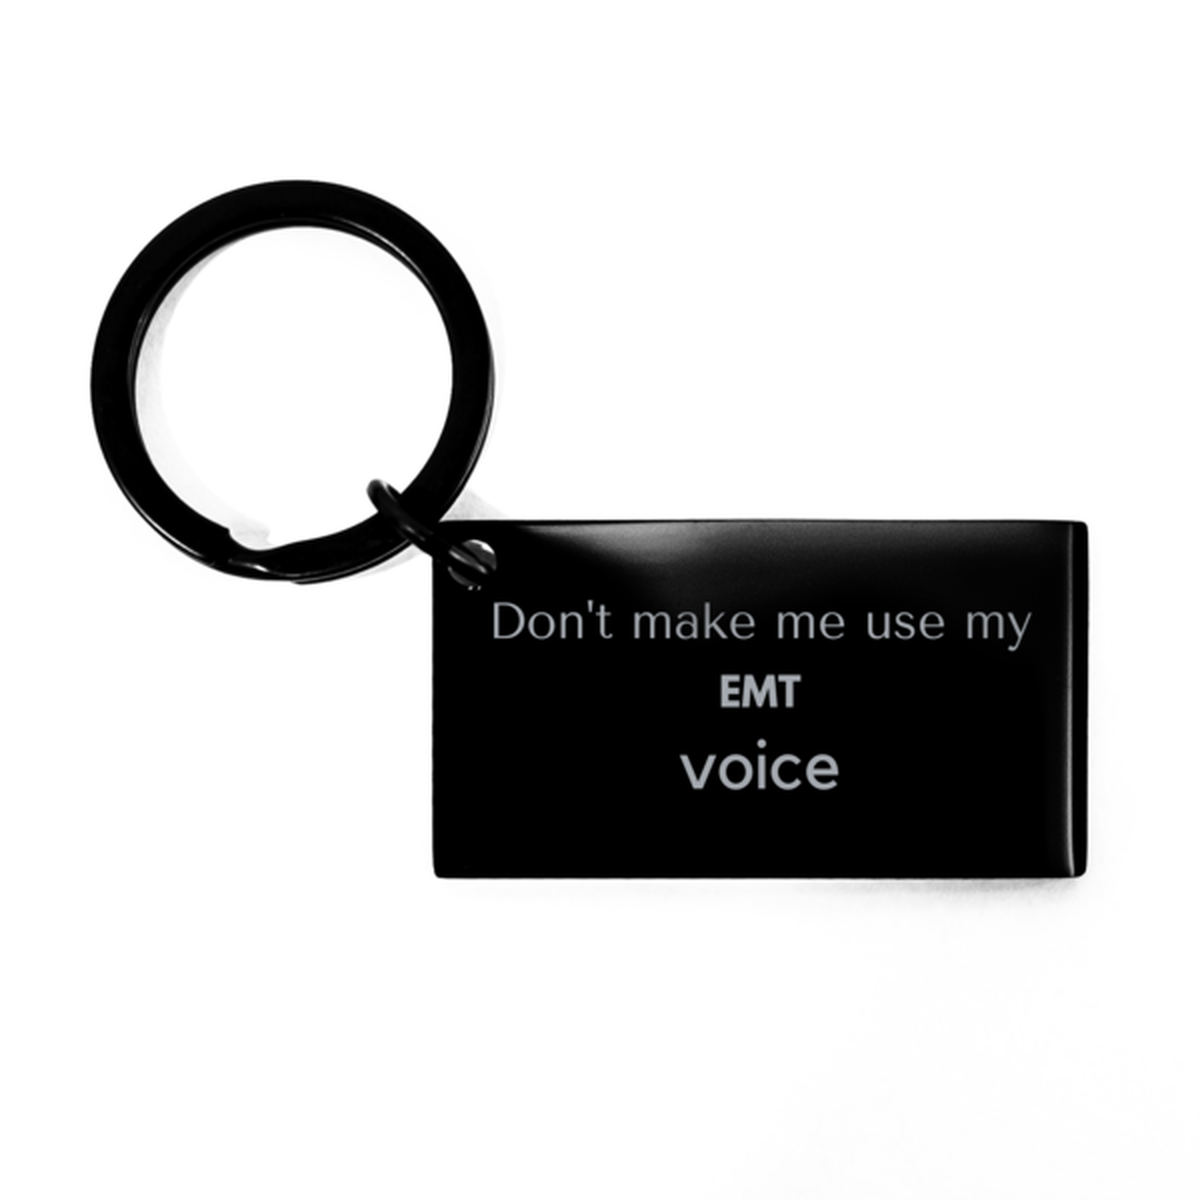 Don't make me use my EMT voice, Sarcasm EMT Gifts, Christmas EMT Keychain Birthday Unique Gifts For EMT Coworkers, Men, Women, Colleague, Friends